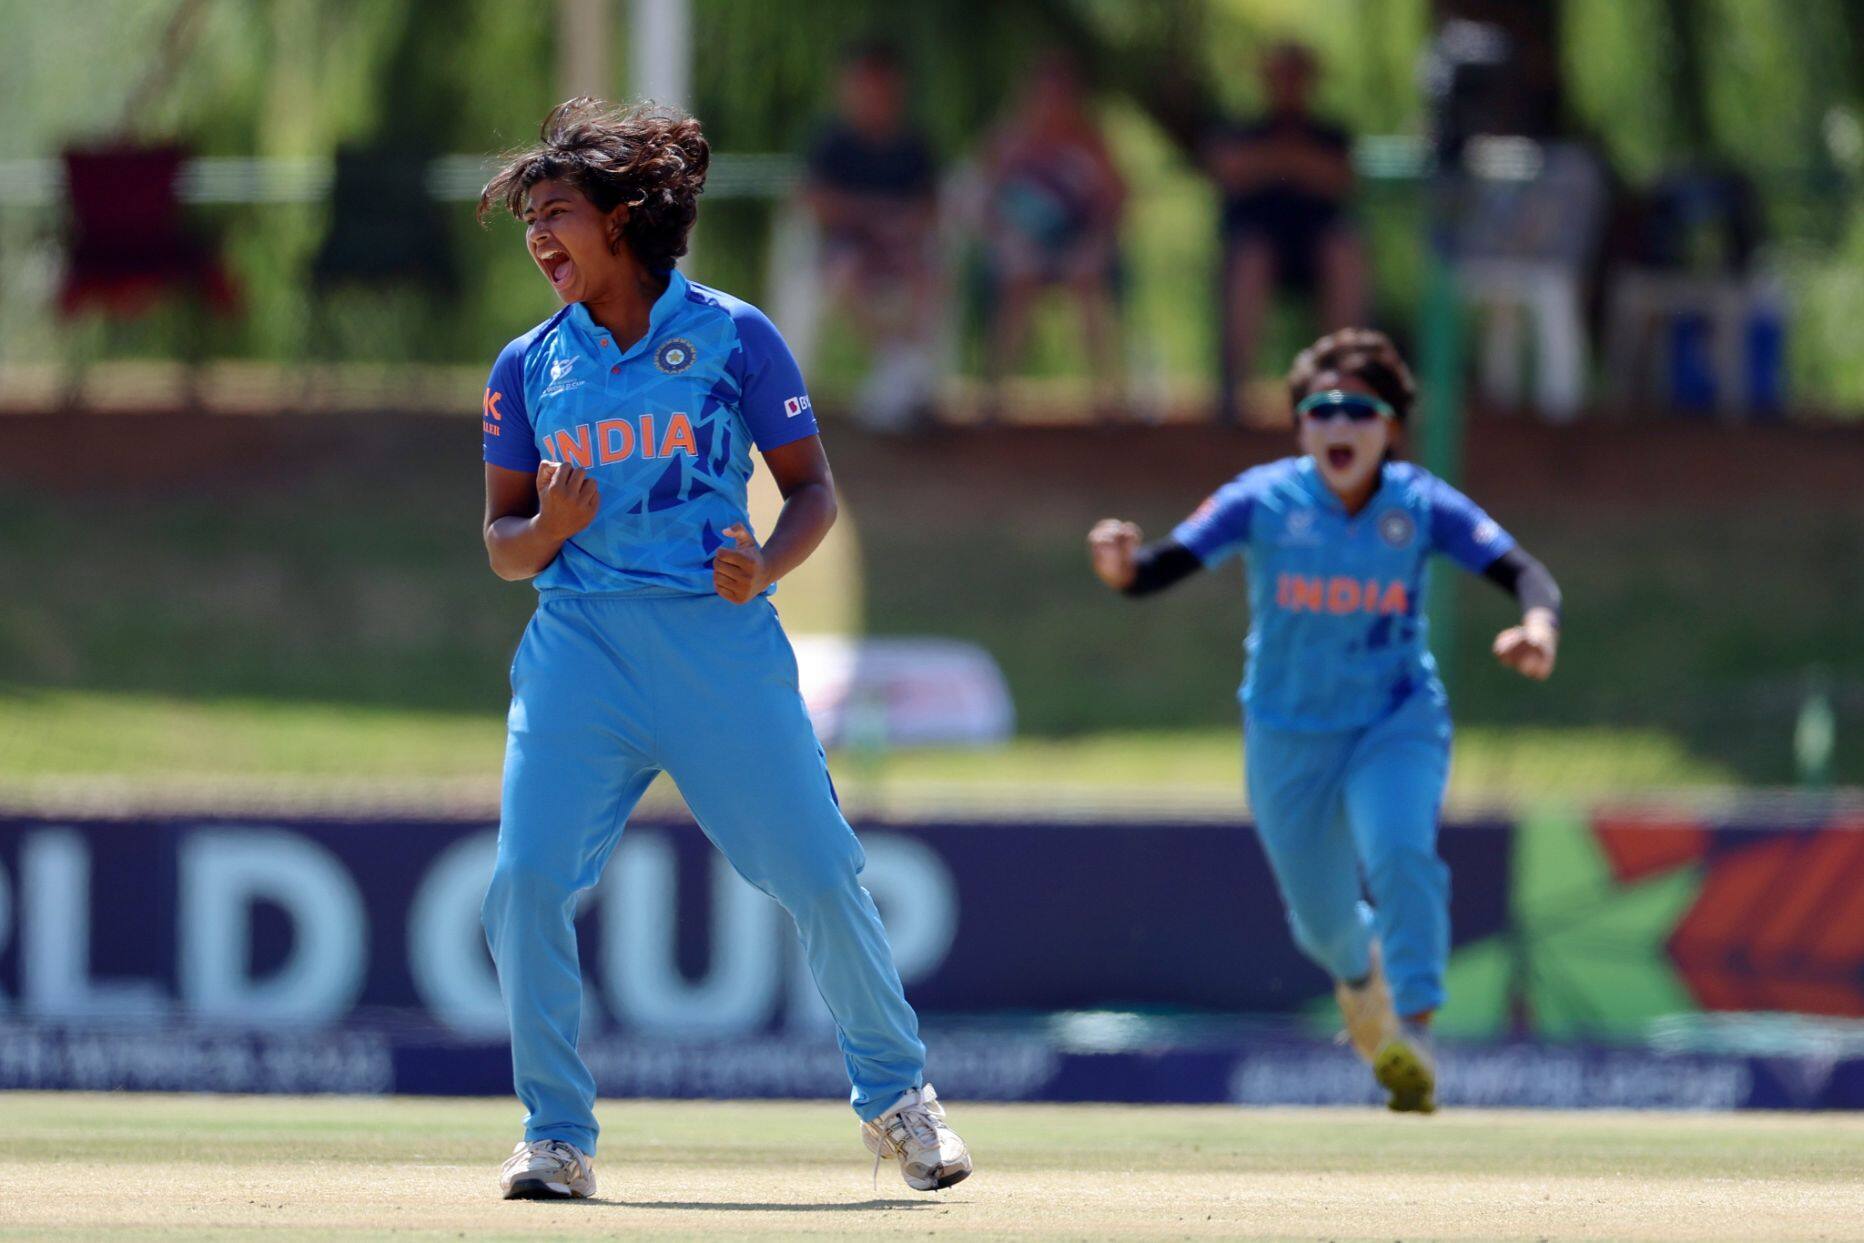 ICC Women's U-19 T20 World Cup Final: India, England battle it out for supremacy